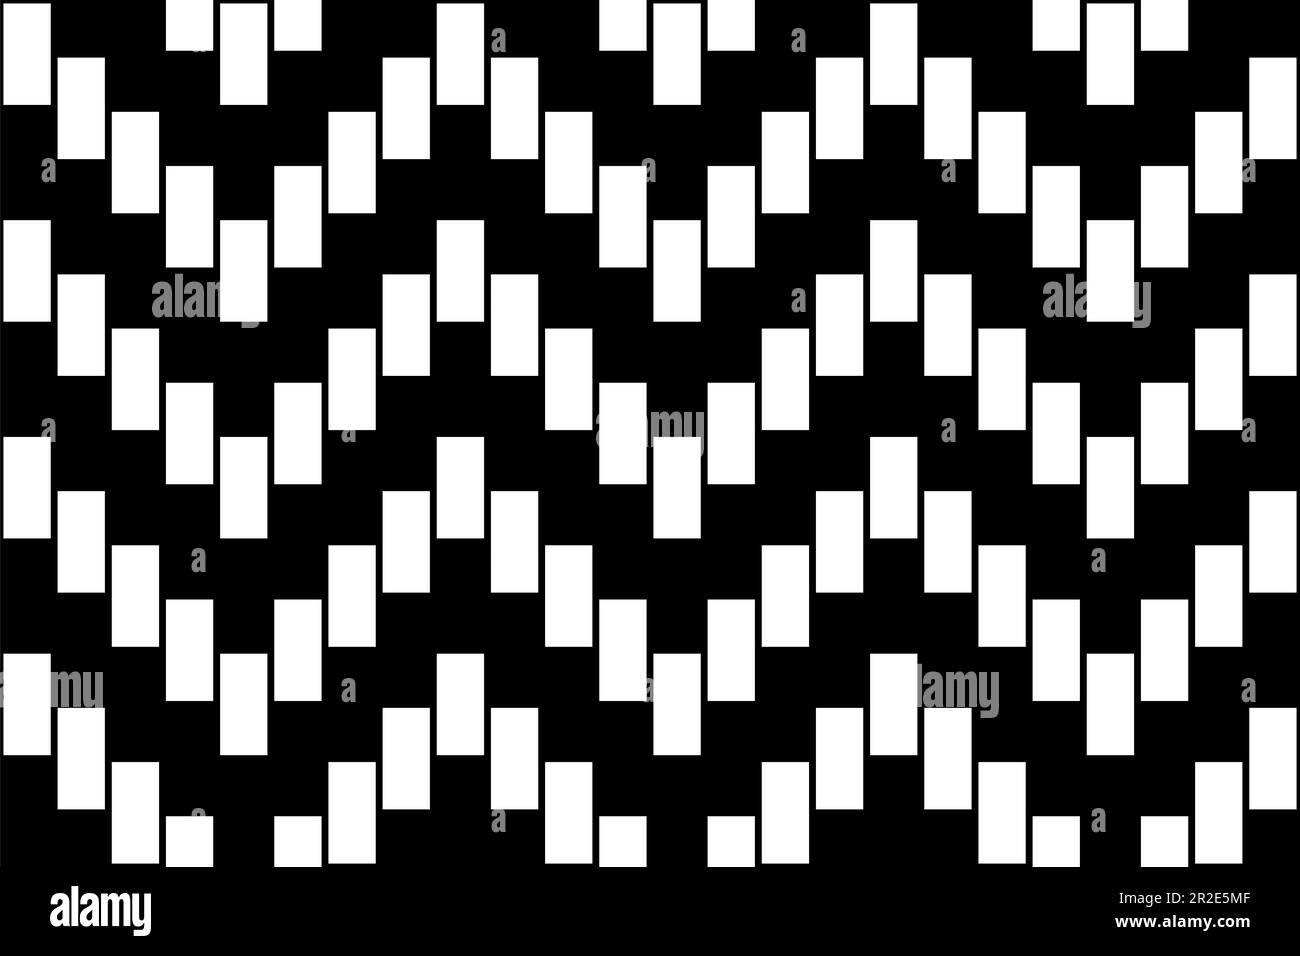 Kindergarten pattern and optical illusion, seamless tile. Effect of irregular appearance where the white areas appear slightly rotated. Stock Photo